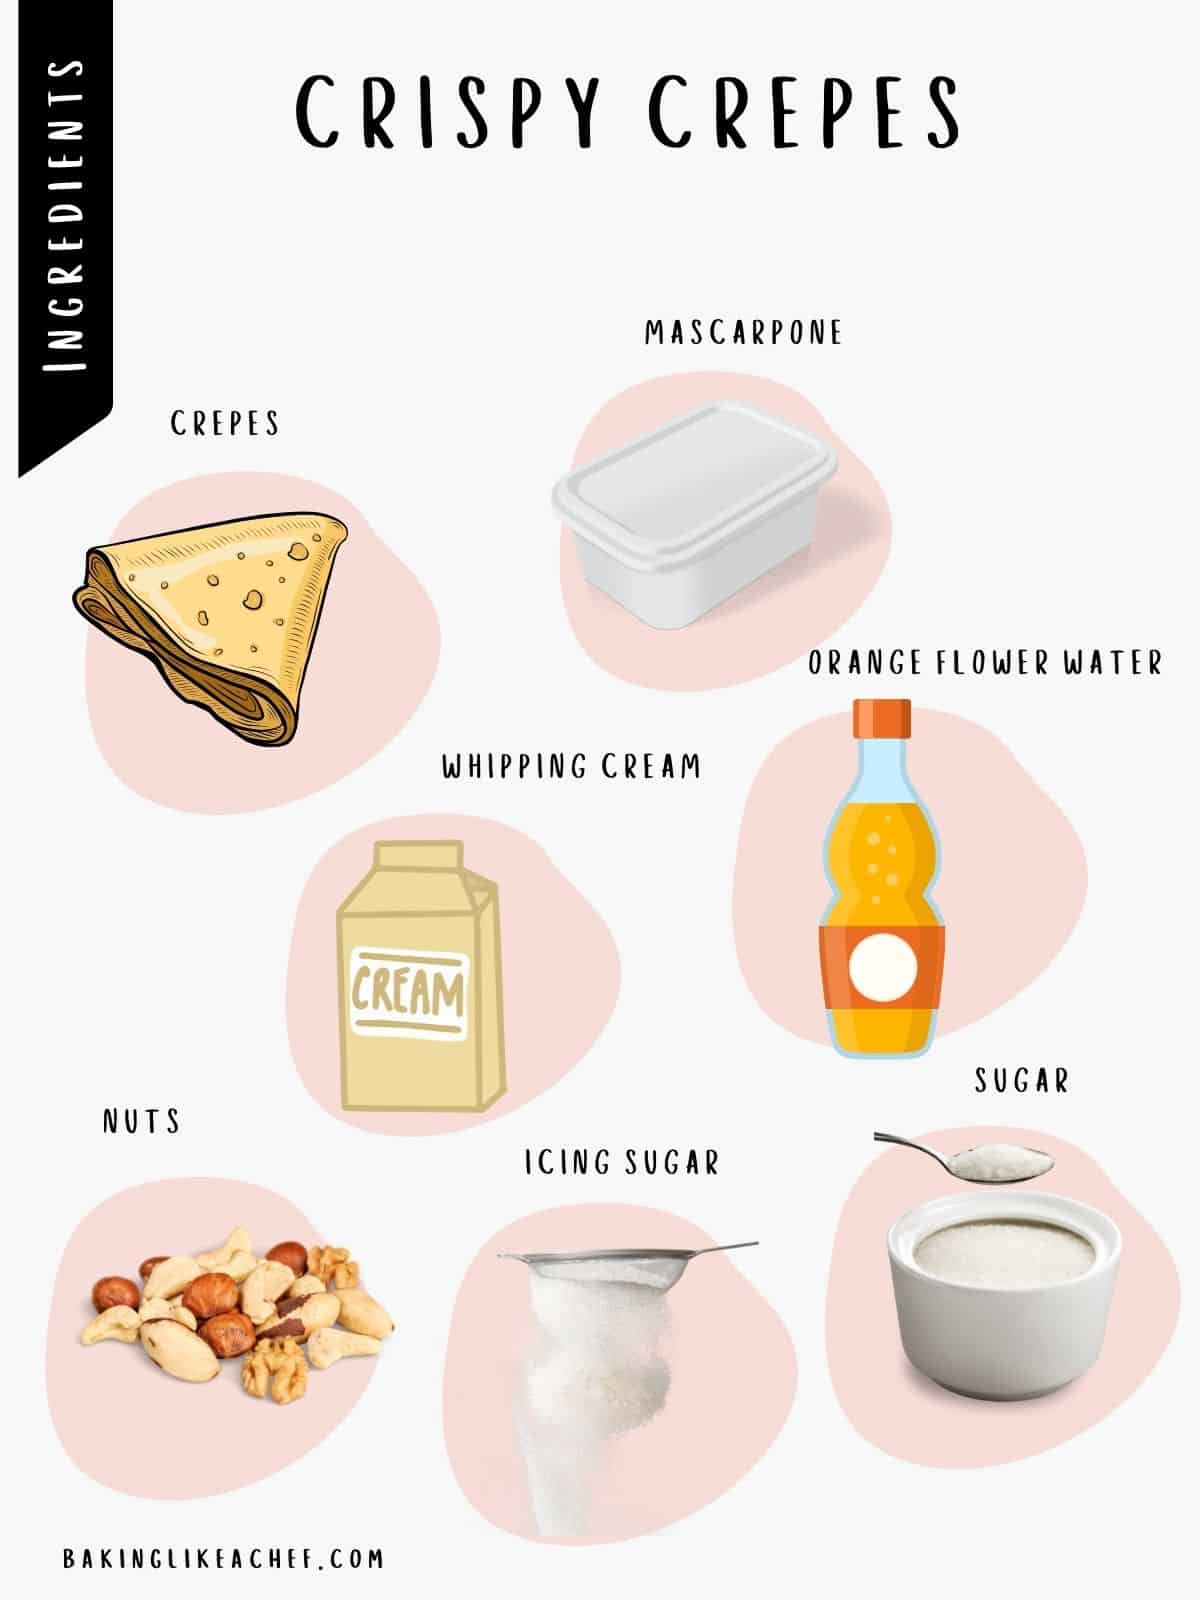 Crispy crepes ingredients in pictures